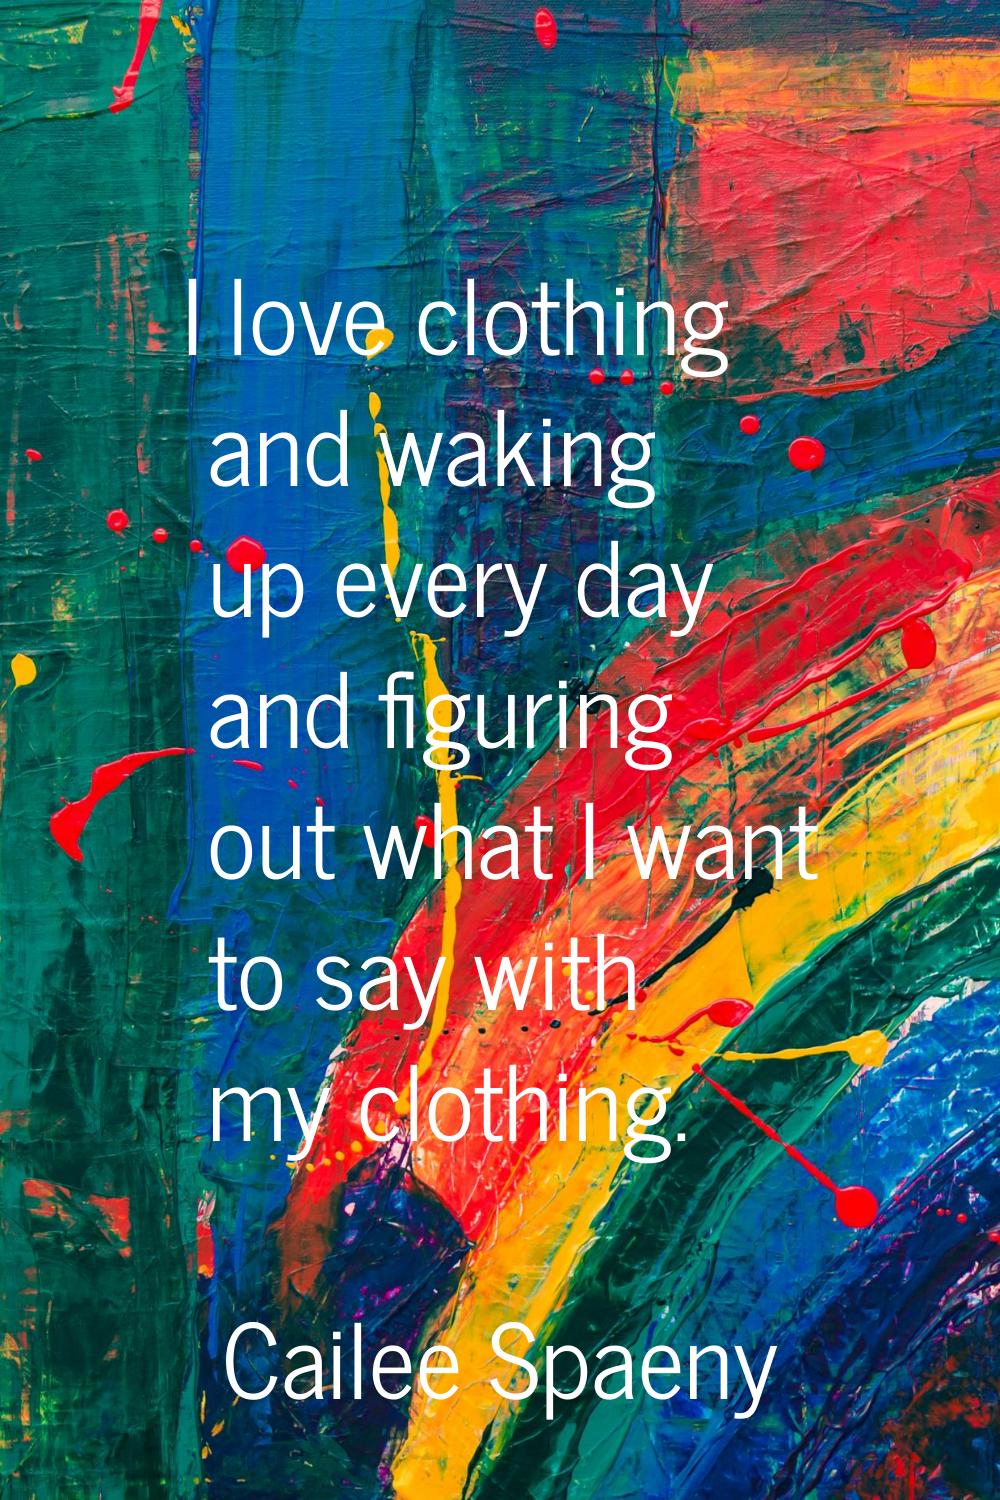 I love clothing and waking up every day and figuring out what I want to say with my clothing.